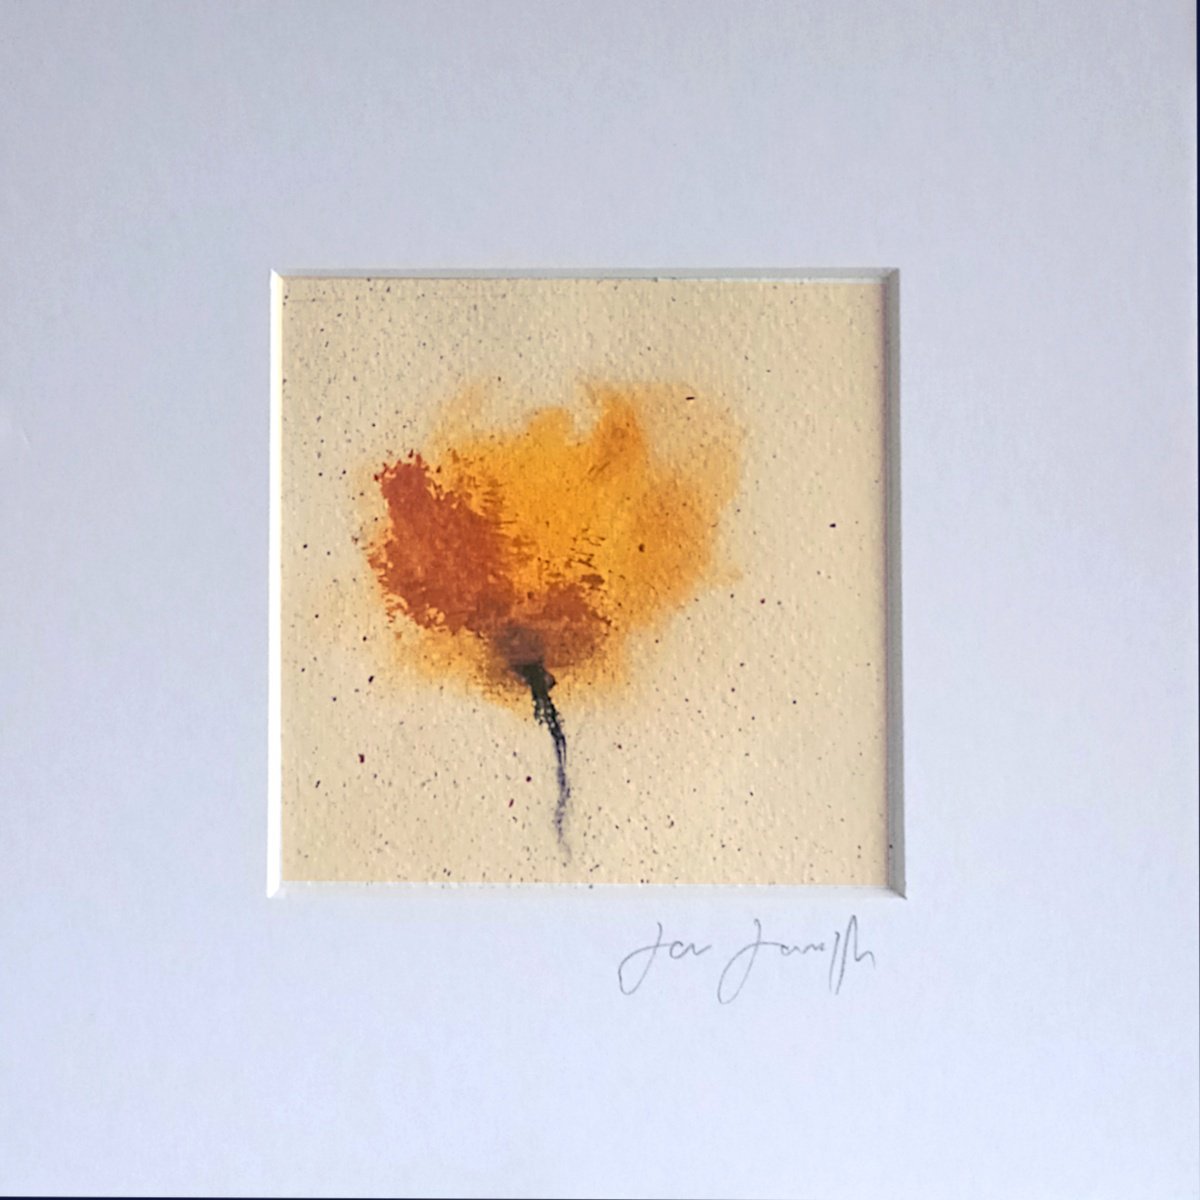 Floral 23 - Small abstract framed floral painting by Jon Joseph